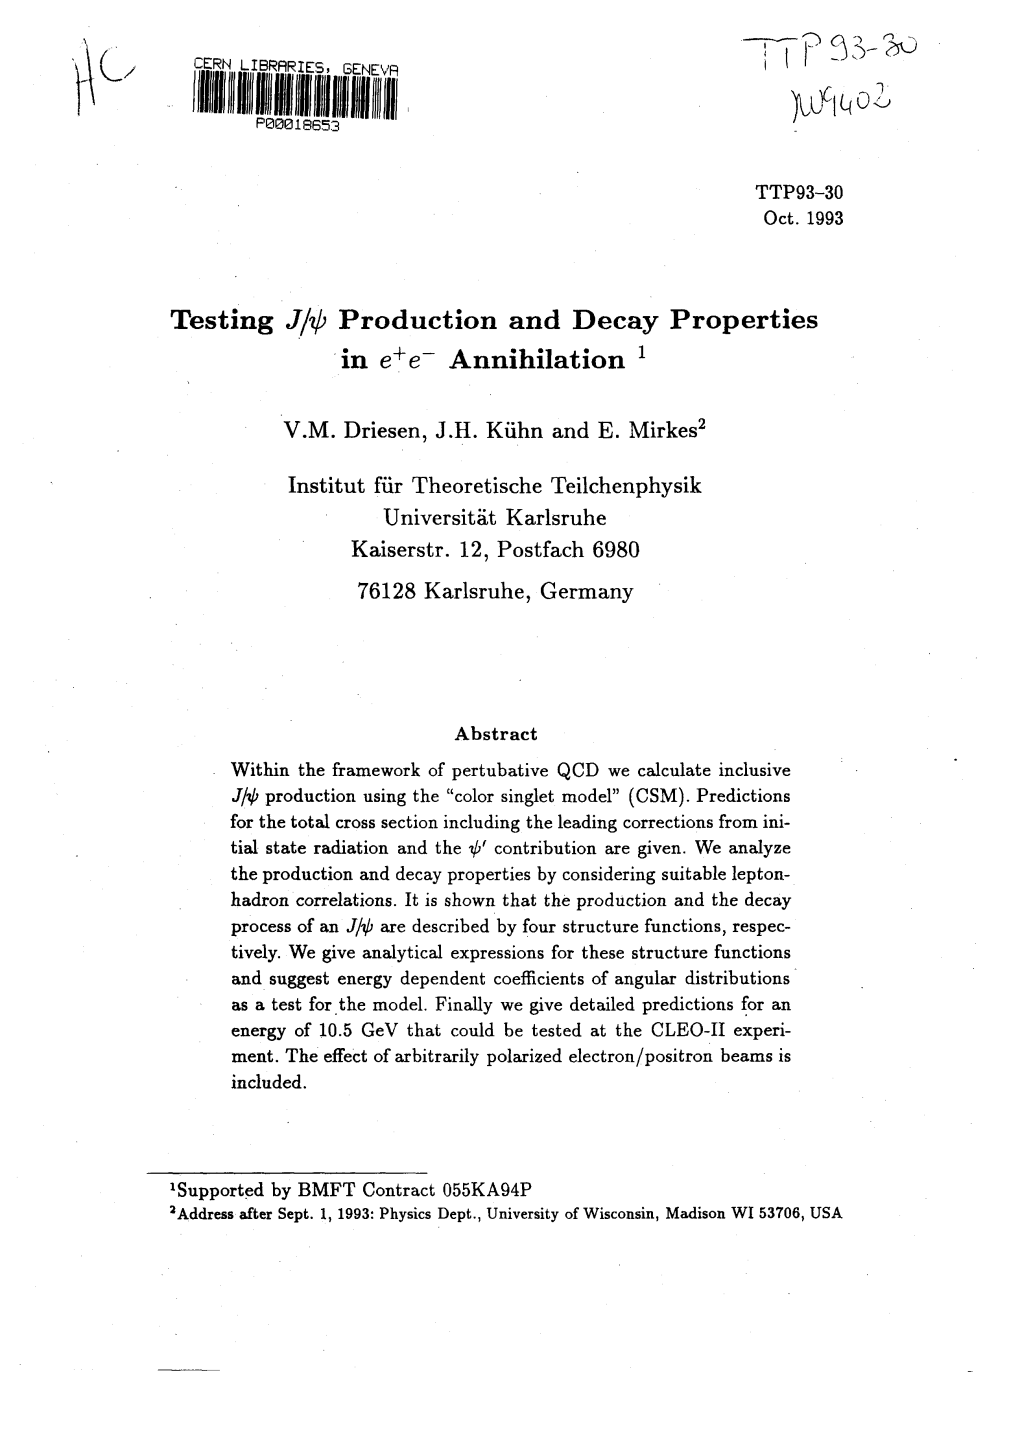 Testing J/$\Psi$ Production and Decay Properties in E+E- Annihilation